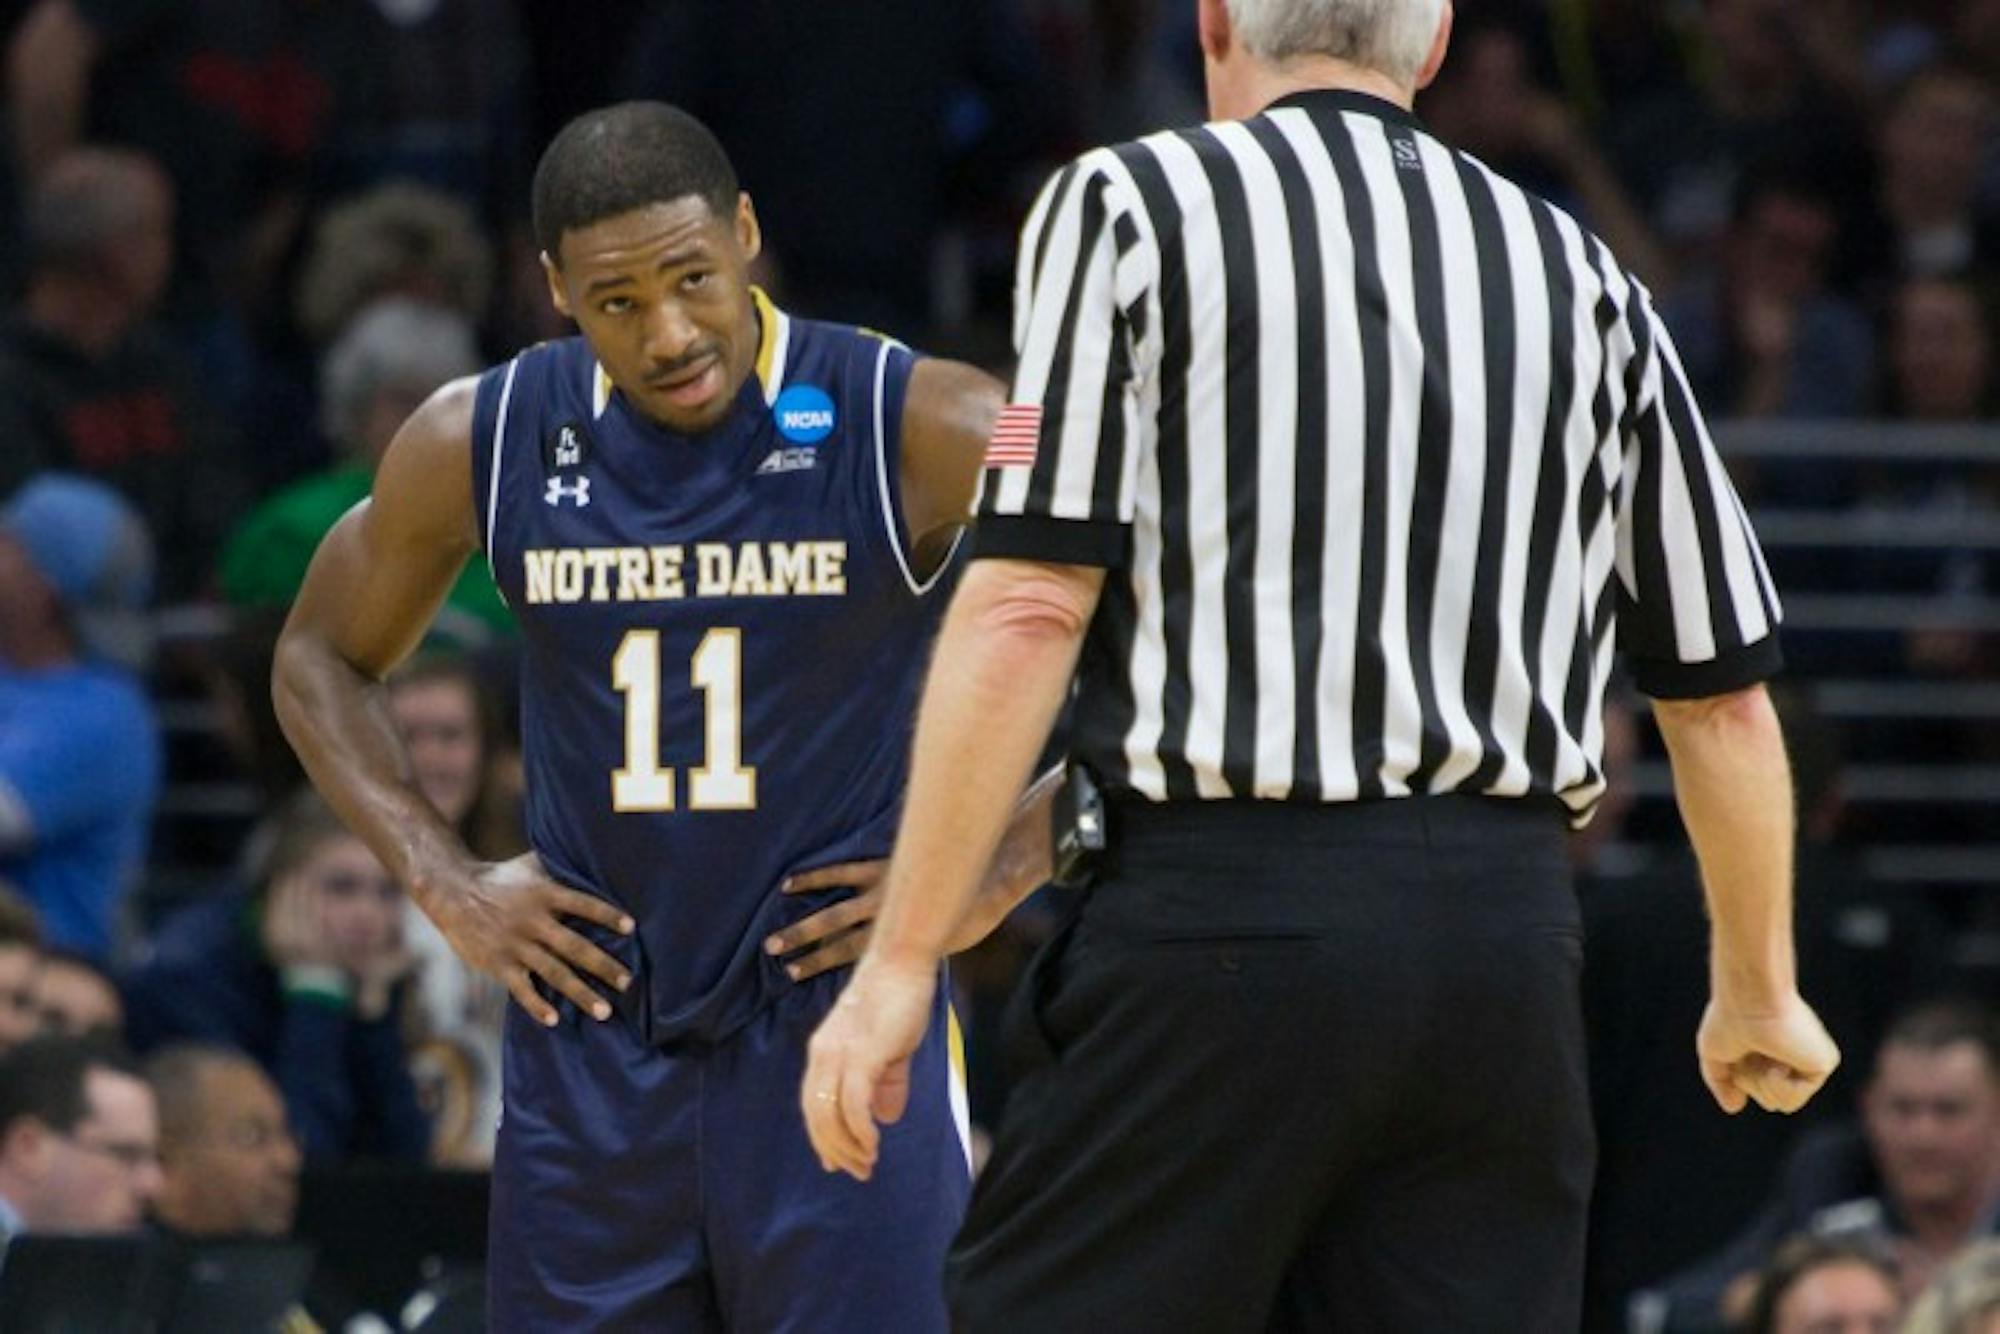 Irish junior guard Demetrius Jackson pleads his case to an official in the waning seconds of Notre Dame's 88-74 loss to North Carolina on Sunday night.